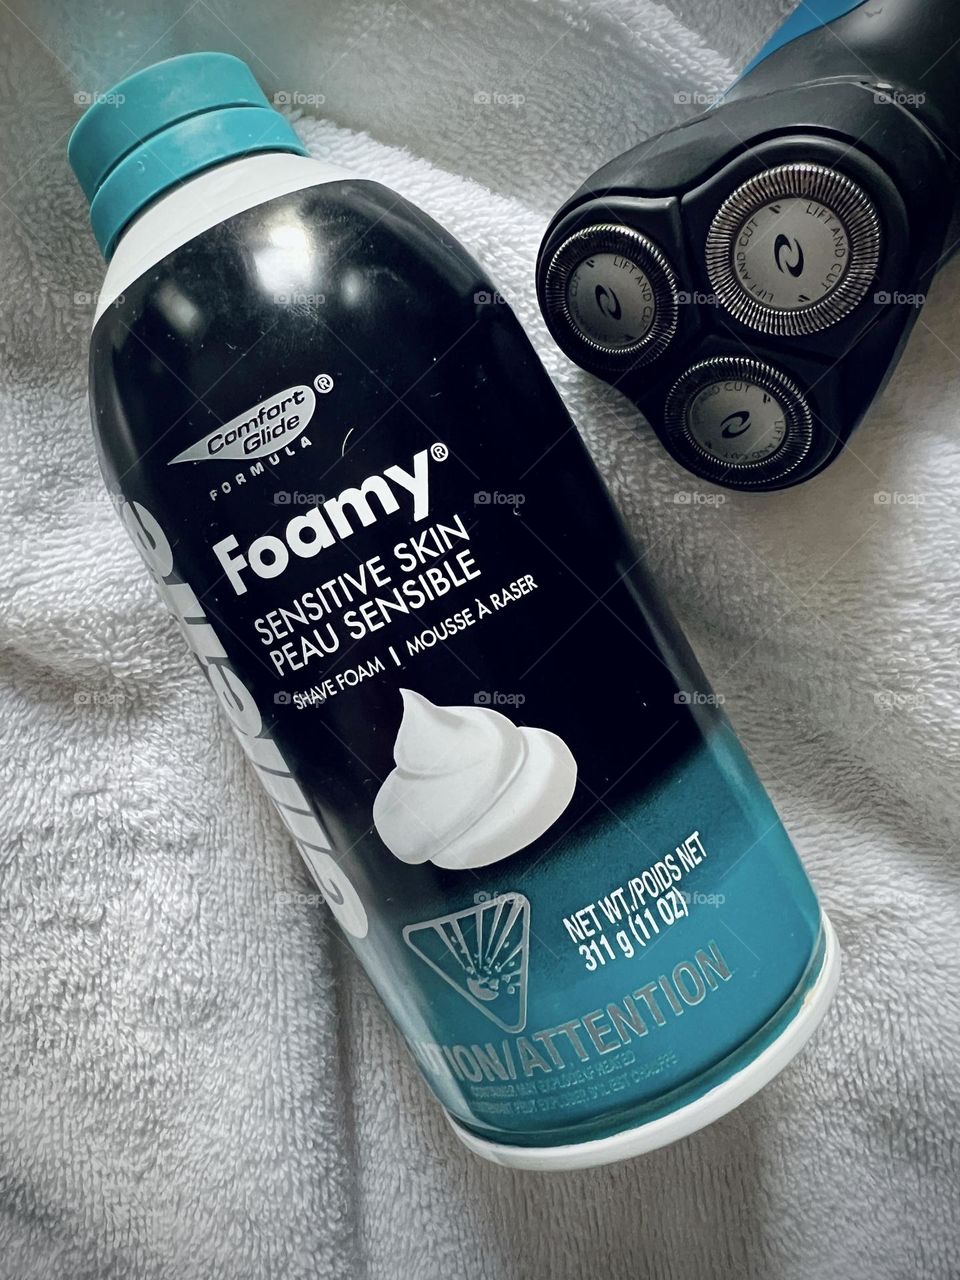 Gillette Foamy sensitive skin against white background and electric shaver